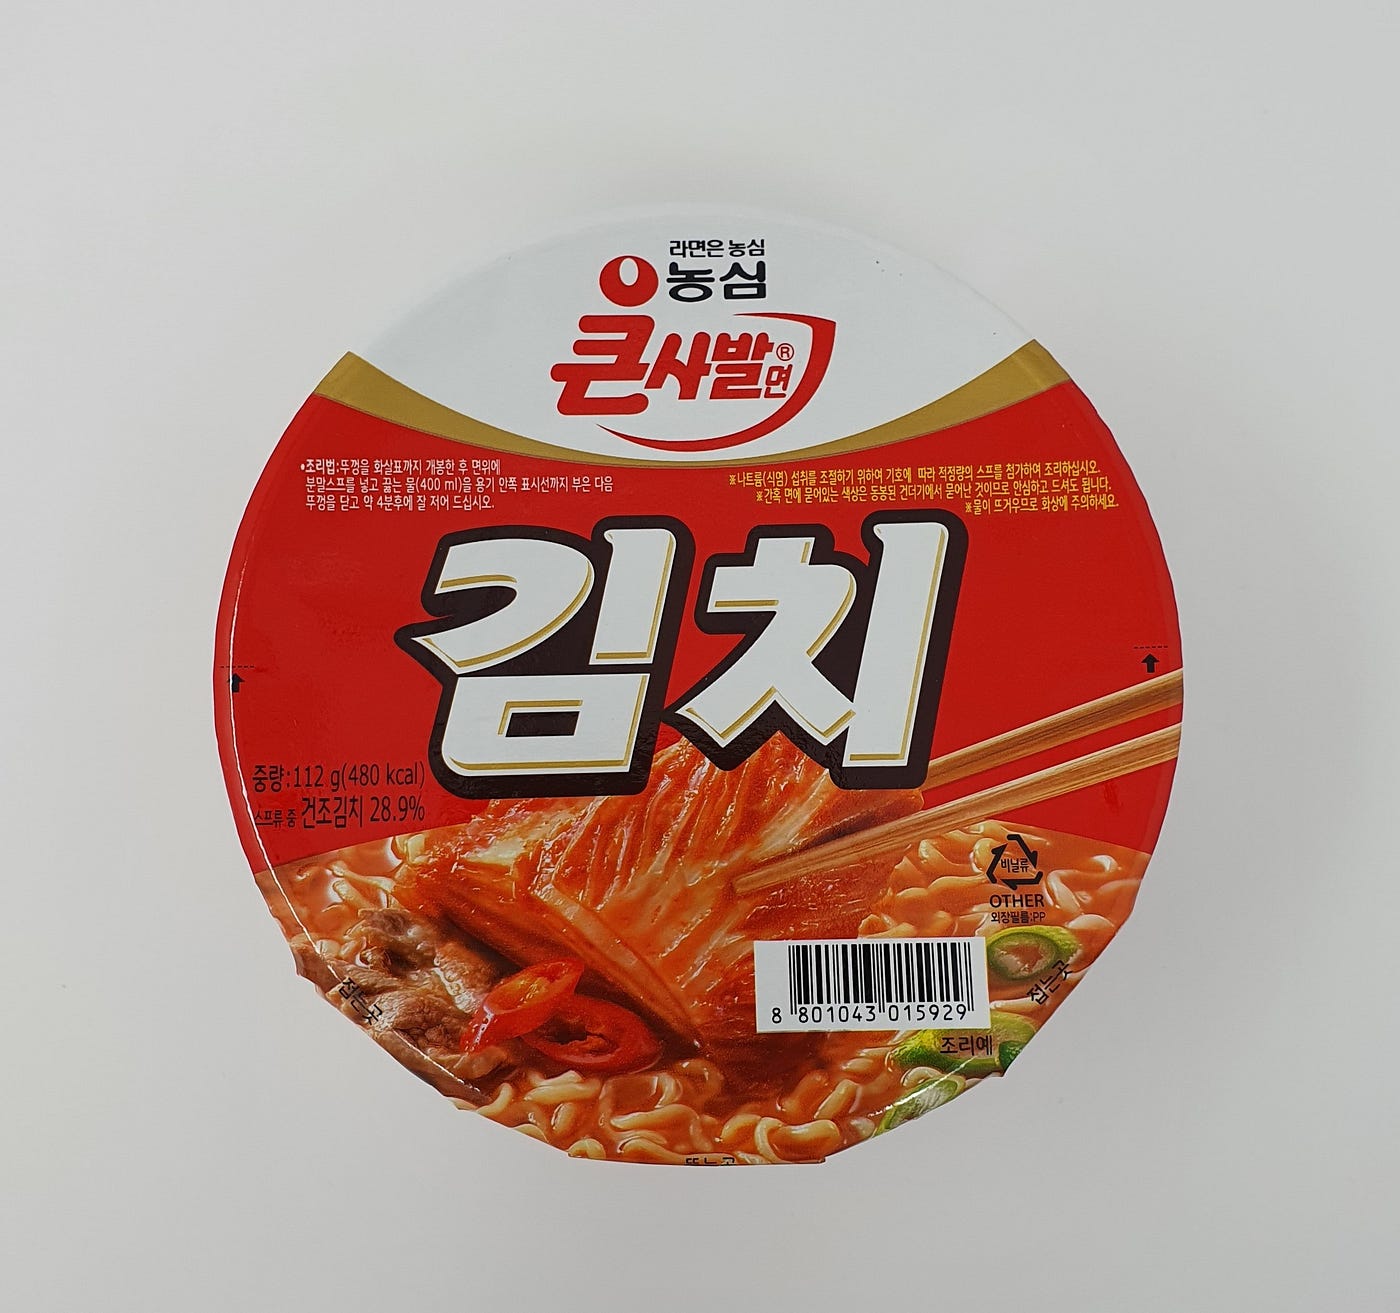 An image of Nongshim’s Kimchi Instant Noodles from the top down.